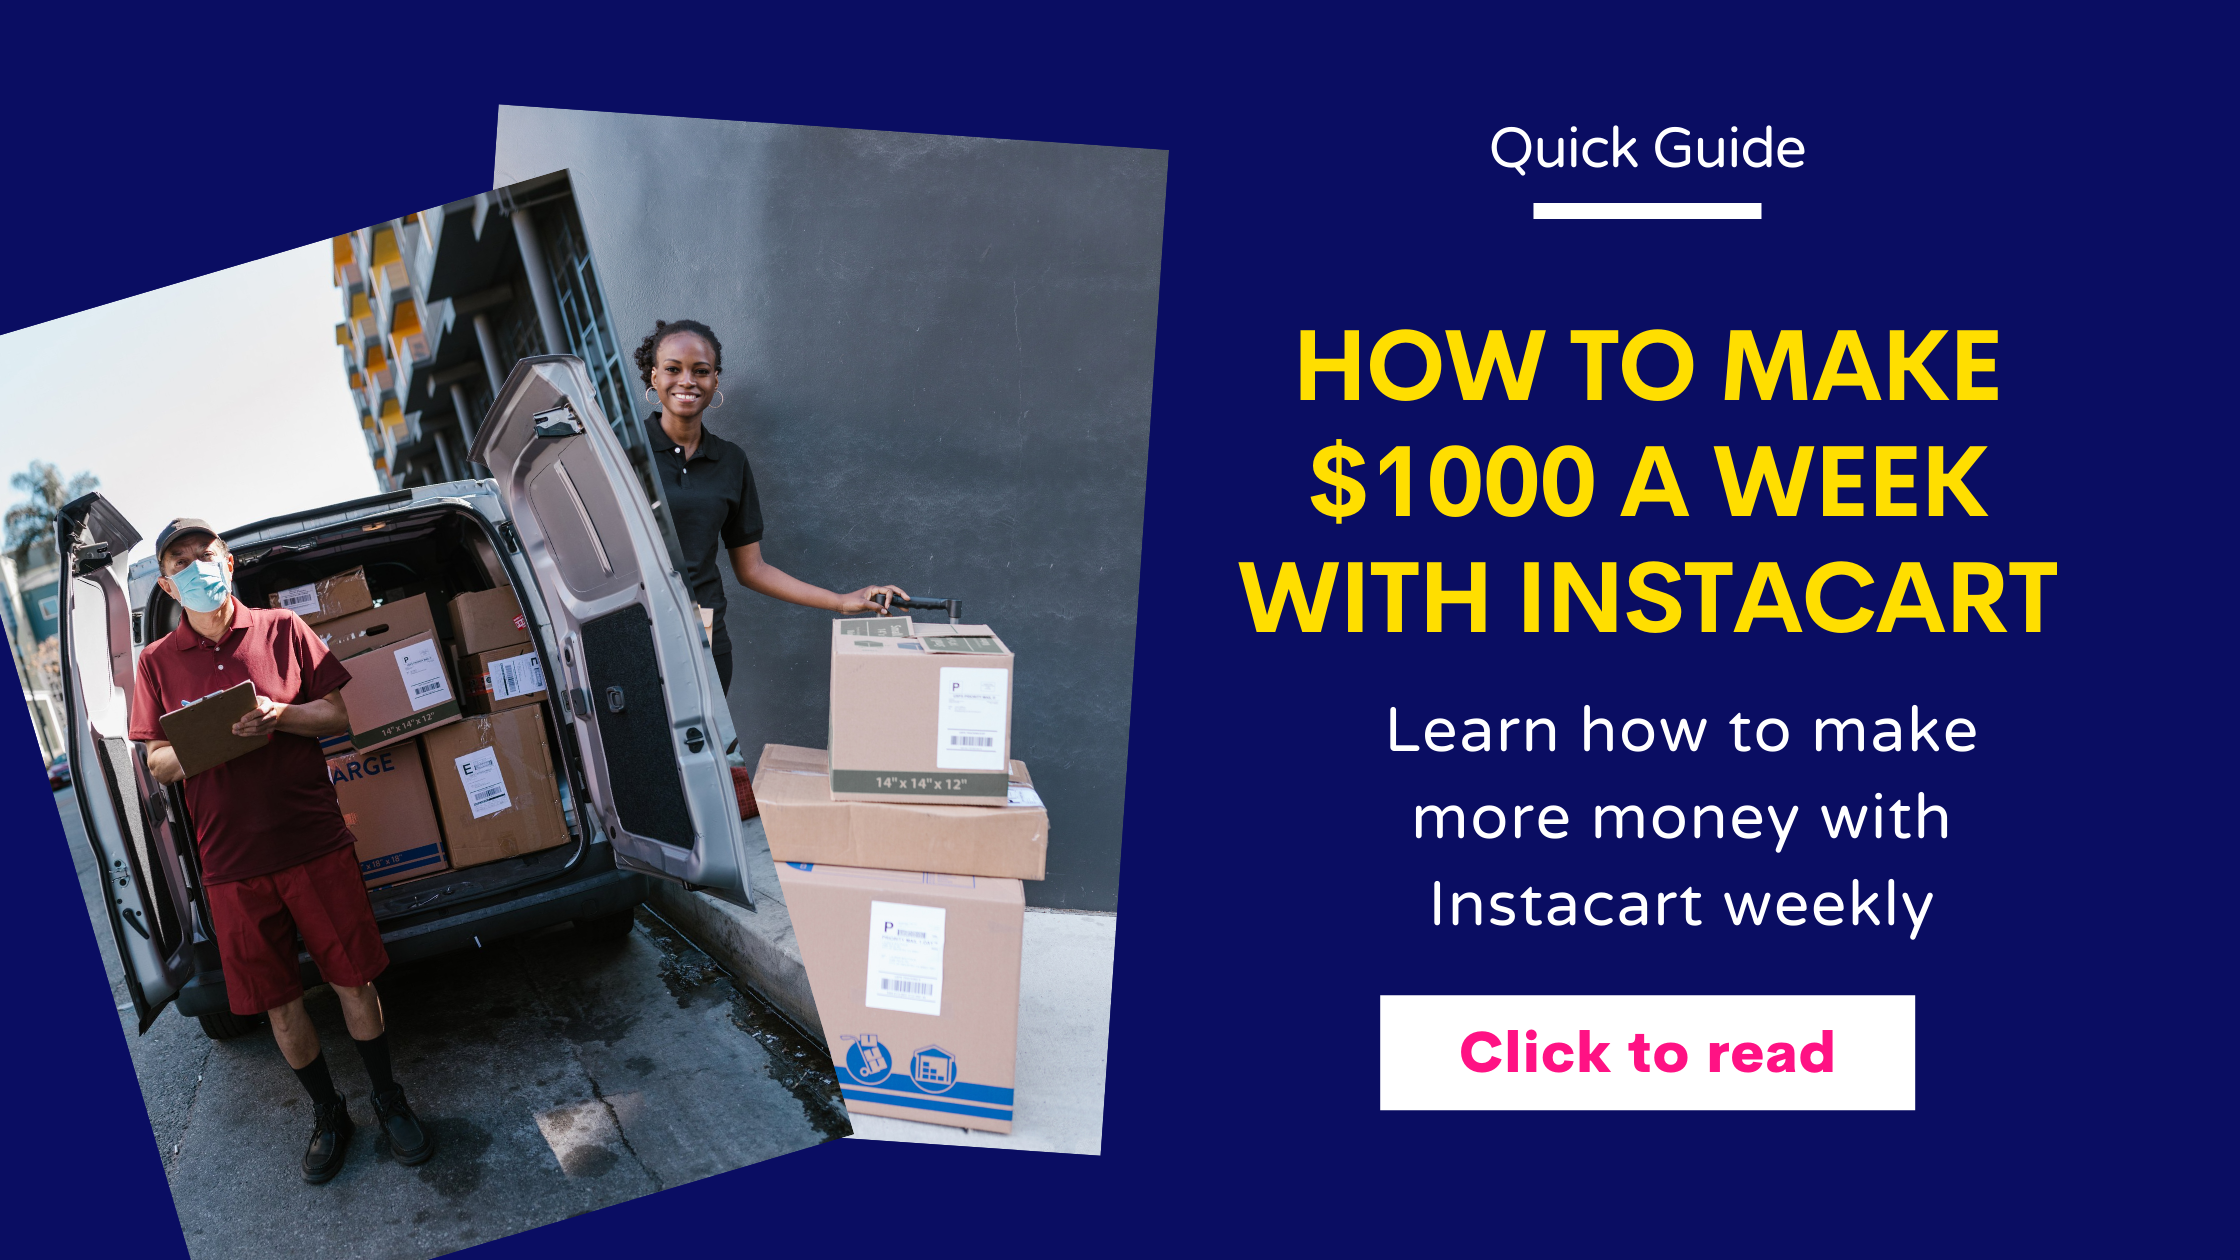 How to make $1000 a week with Instacart